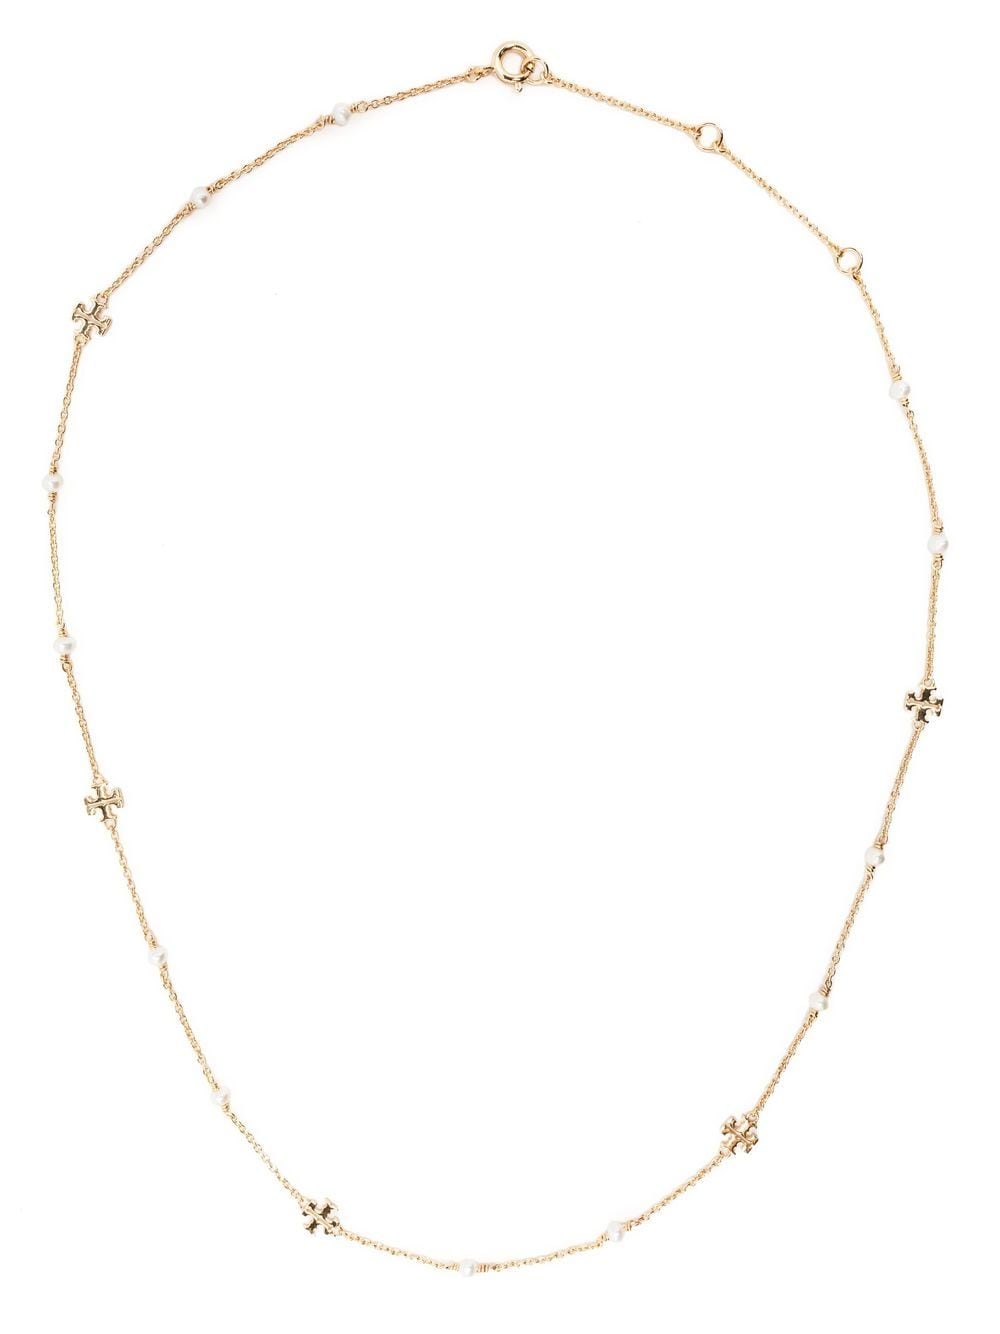 Tory Burch logo chain-link necklace - Gold von Tory Burch